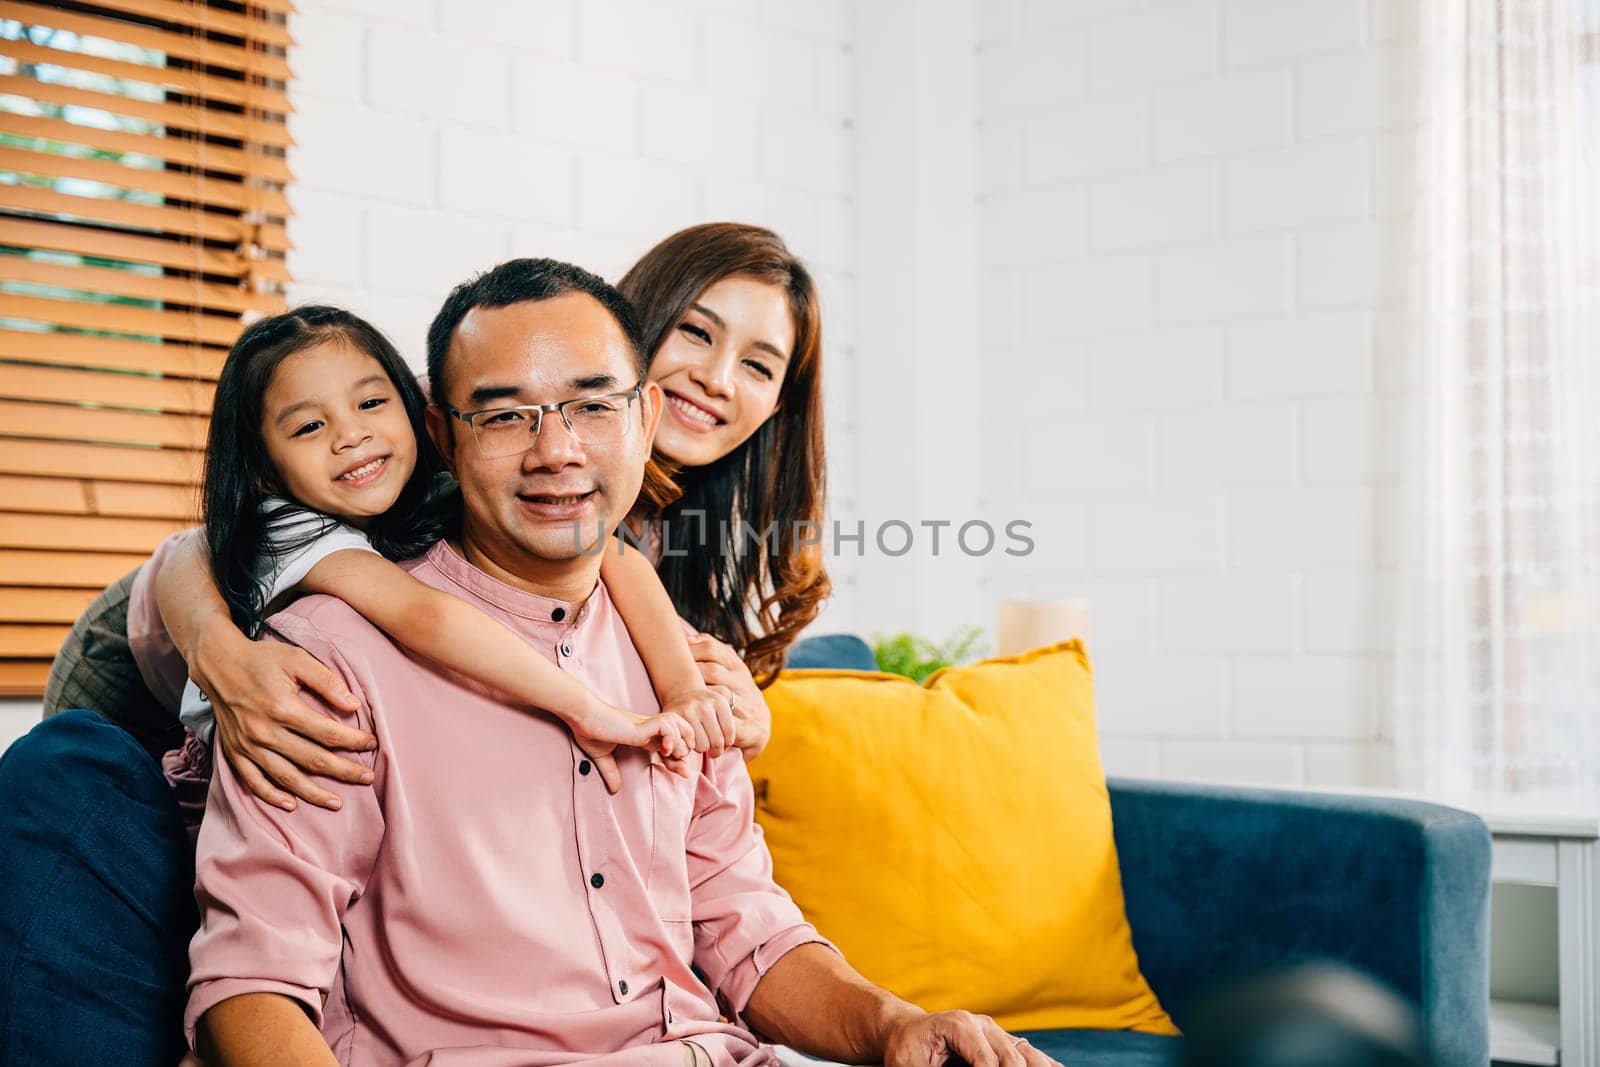 A modern home becomes the backdrop for a joyful family moment on the sofa. Parents daughters and siblings embrace bond and laugh radiating happiness and togetherness.